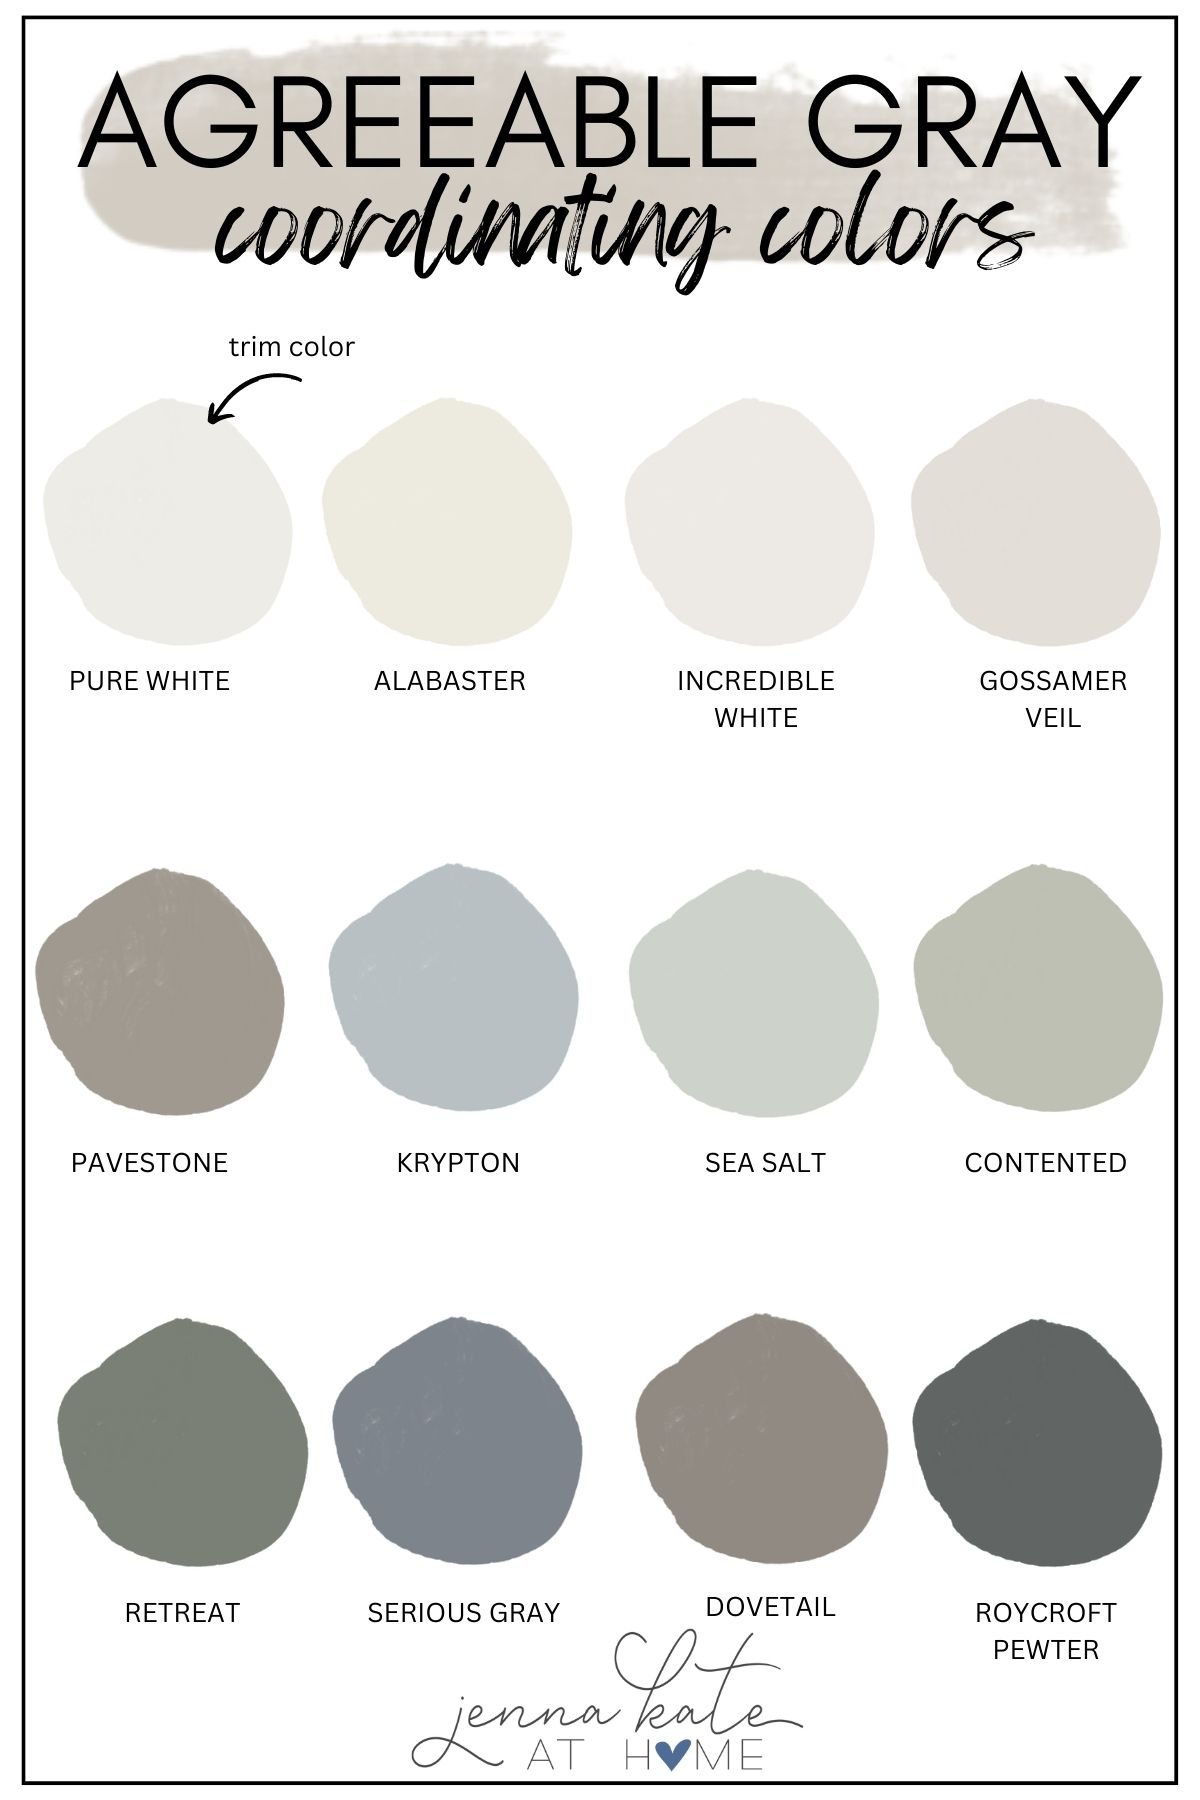 paint swatches of coordinating colors for agreeable gray